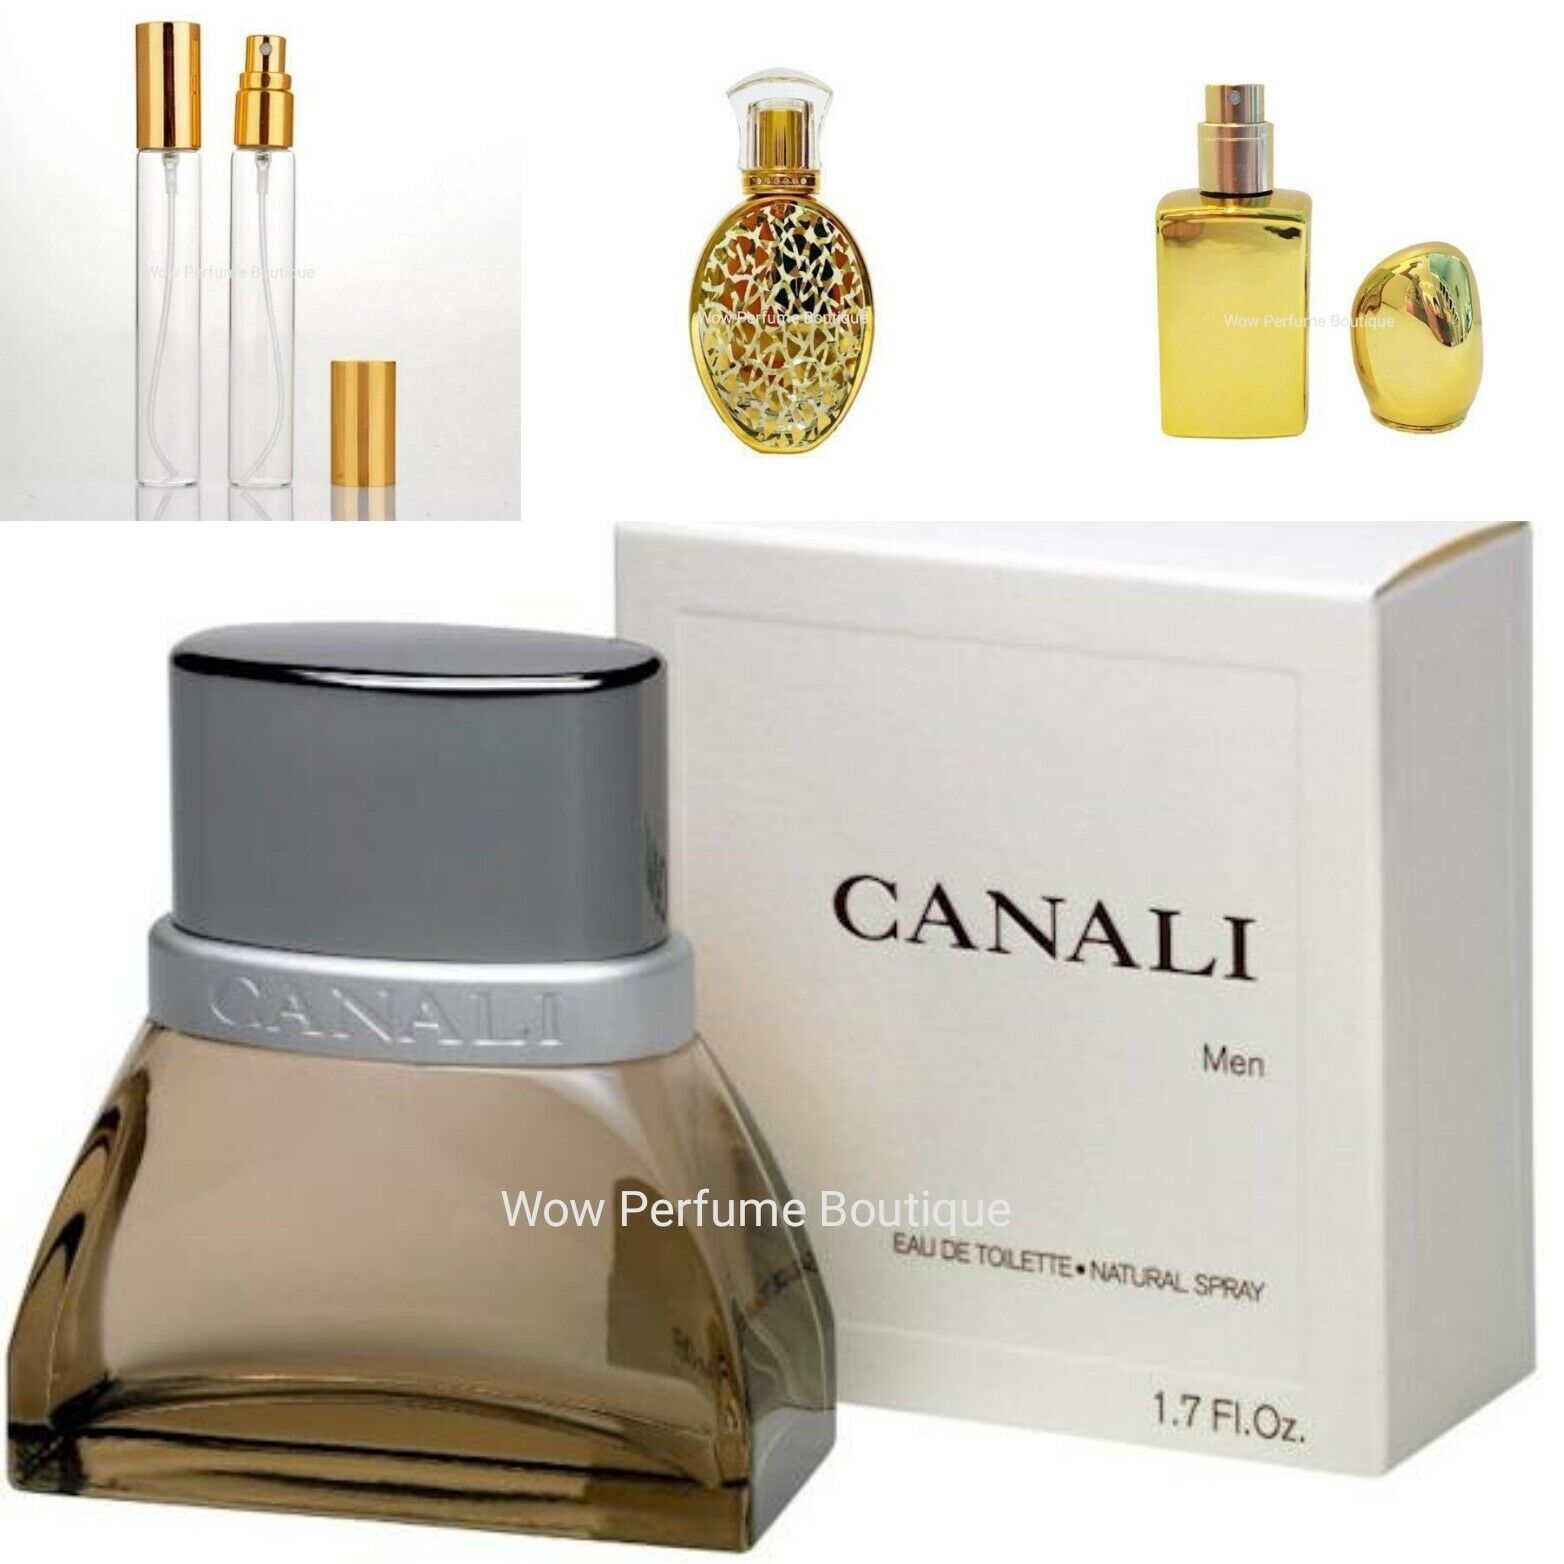 CANALI DAL 1934 by Canali  for  men DECANTED EDP SPRAY. RARE! Choose your size!